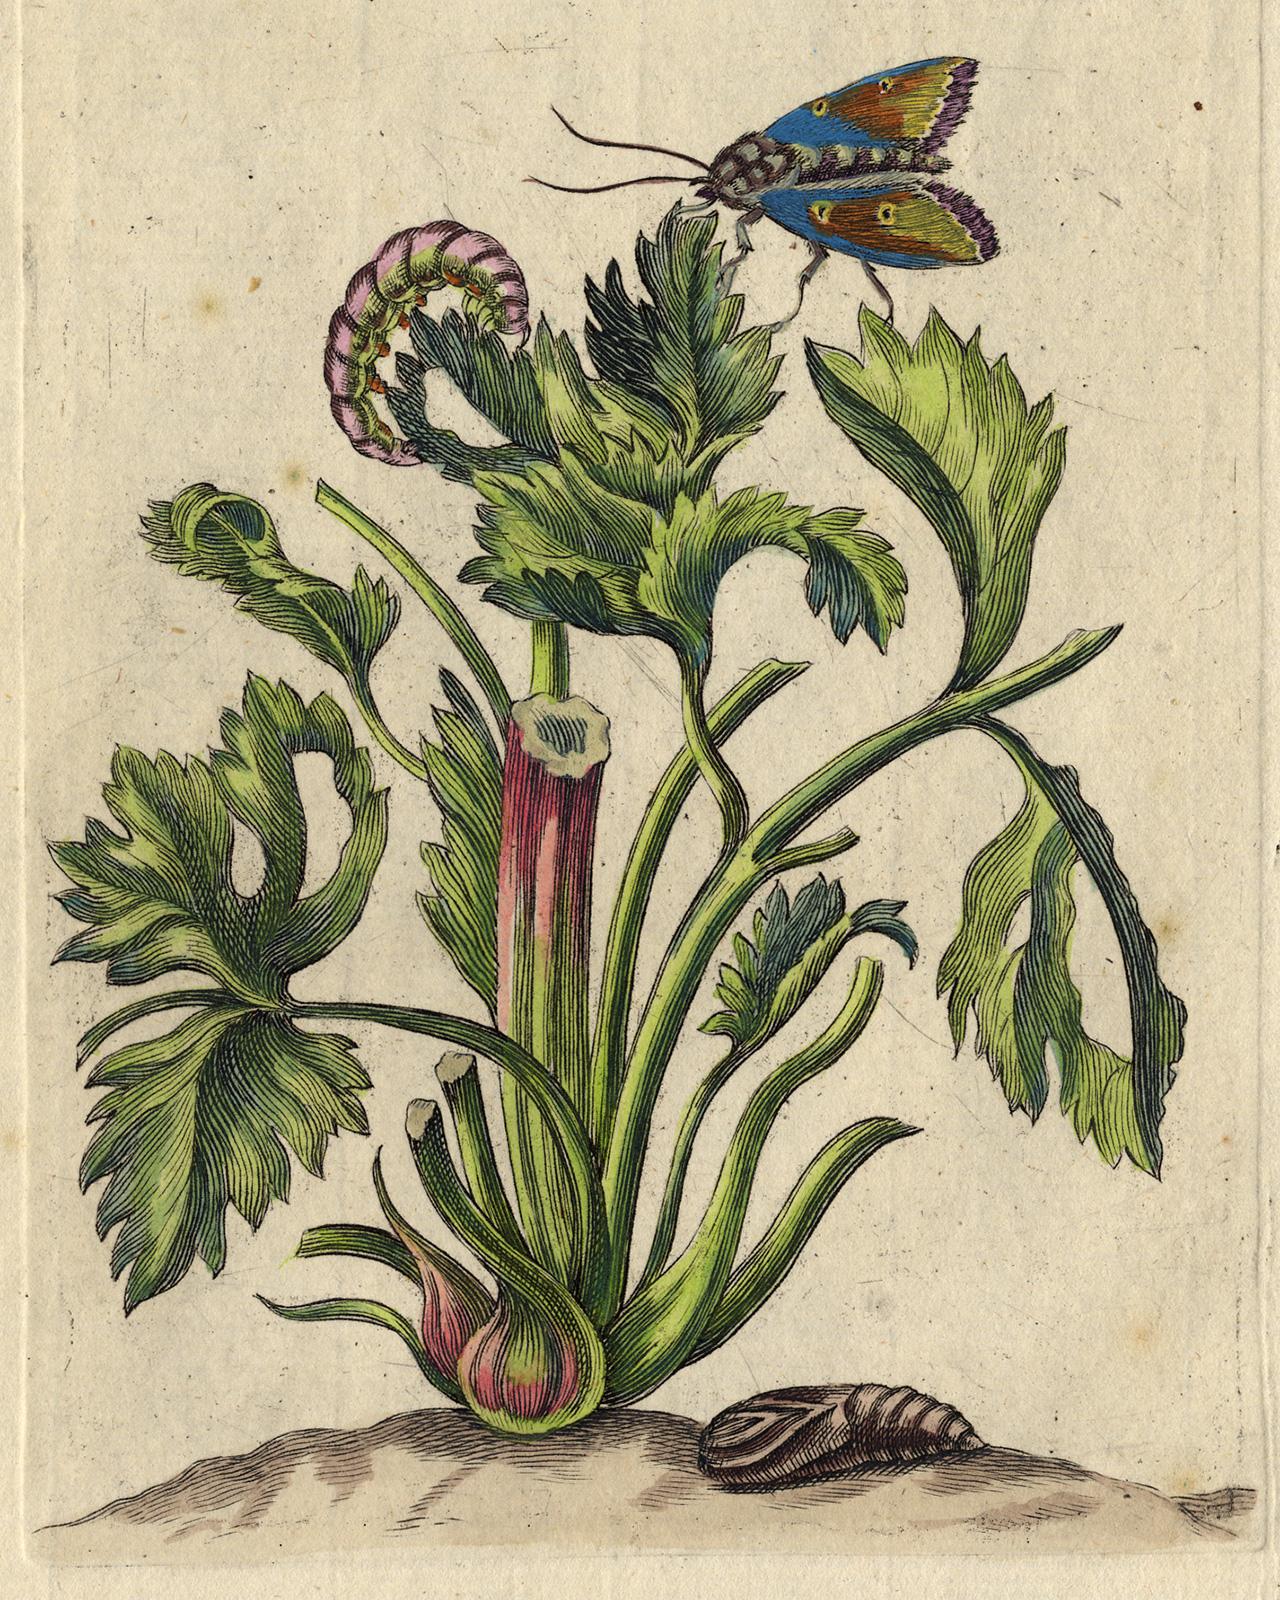 Hollyhocks with insects by Merian - Handcoloured engraving - 18th century - Print by Maria Sybilla Merian